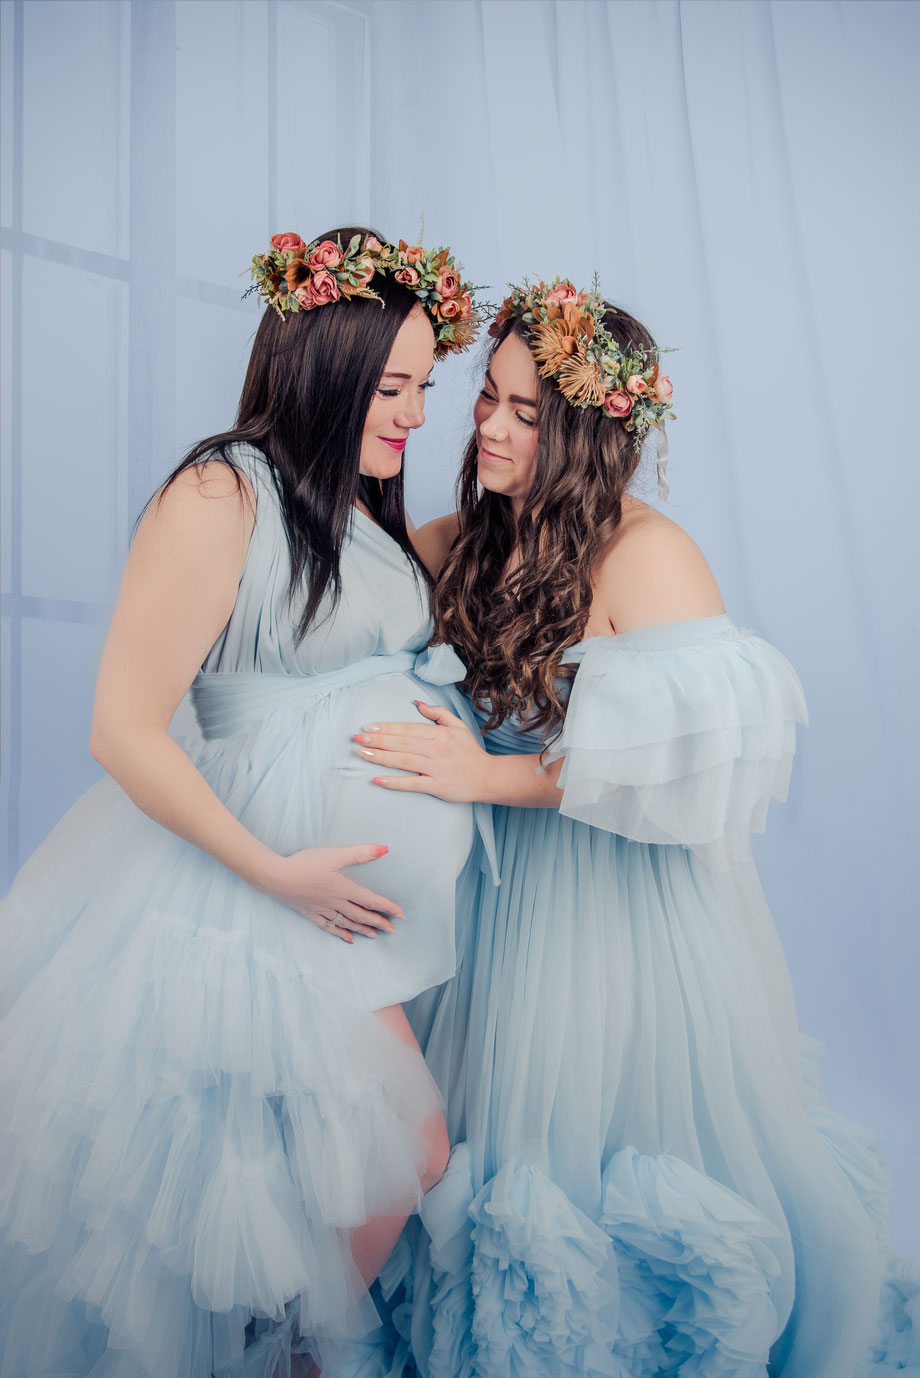 blue dresses and flowers in maternity shoot